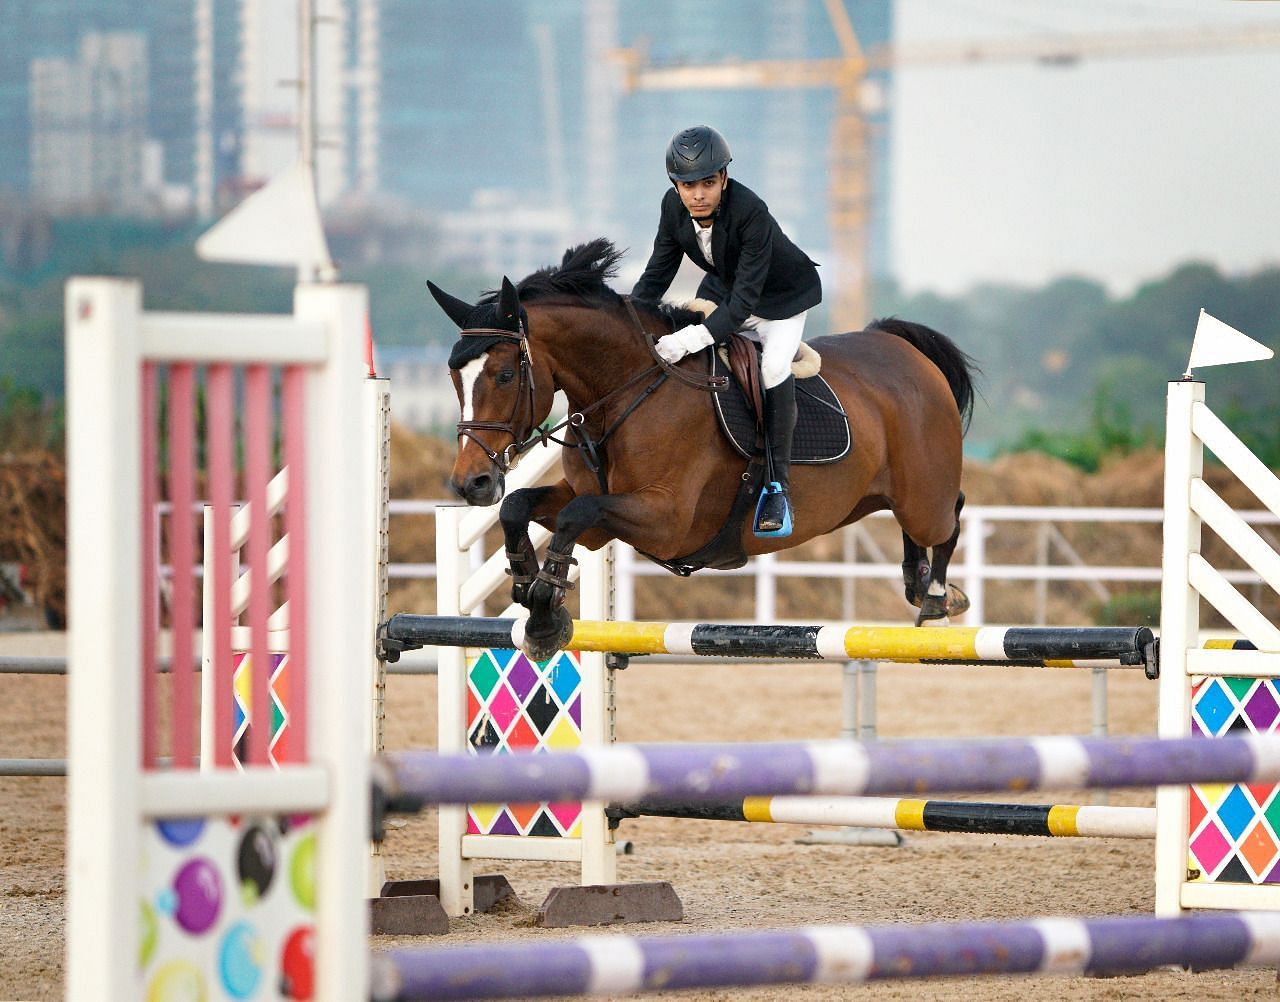 Zrey Dodhy at the Regional Equestrian League qualifiers. (PC: ARC)